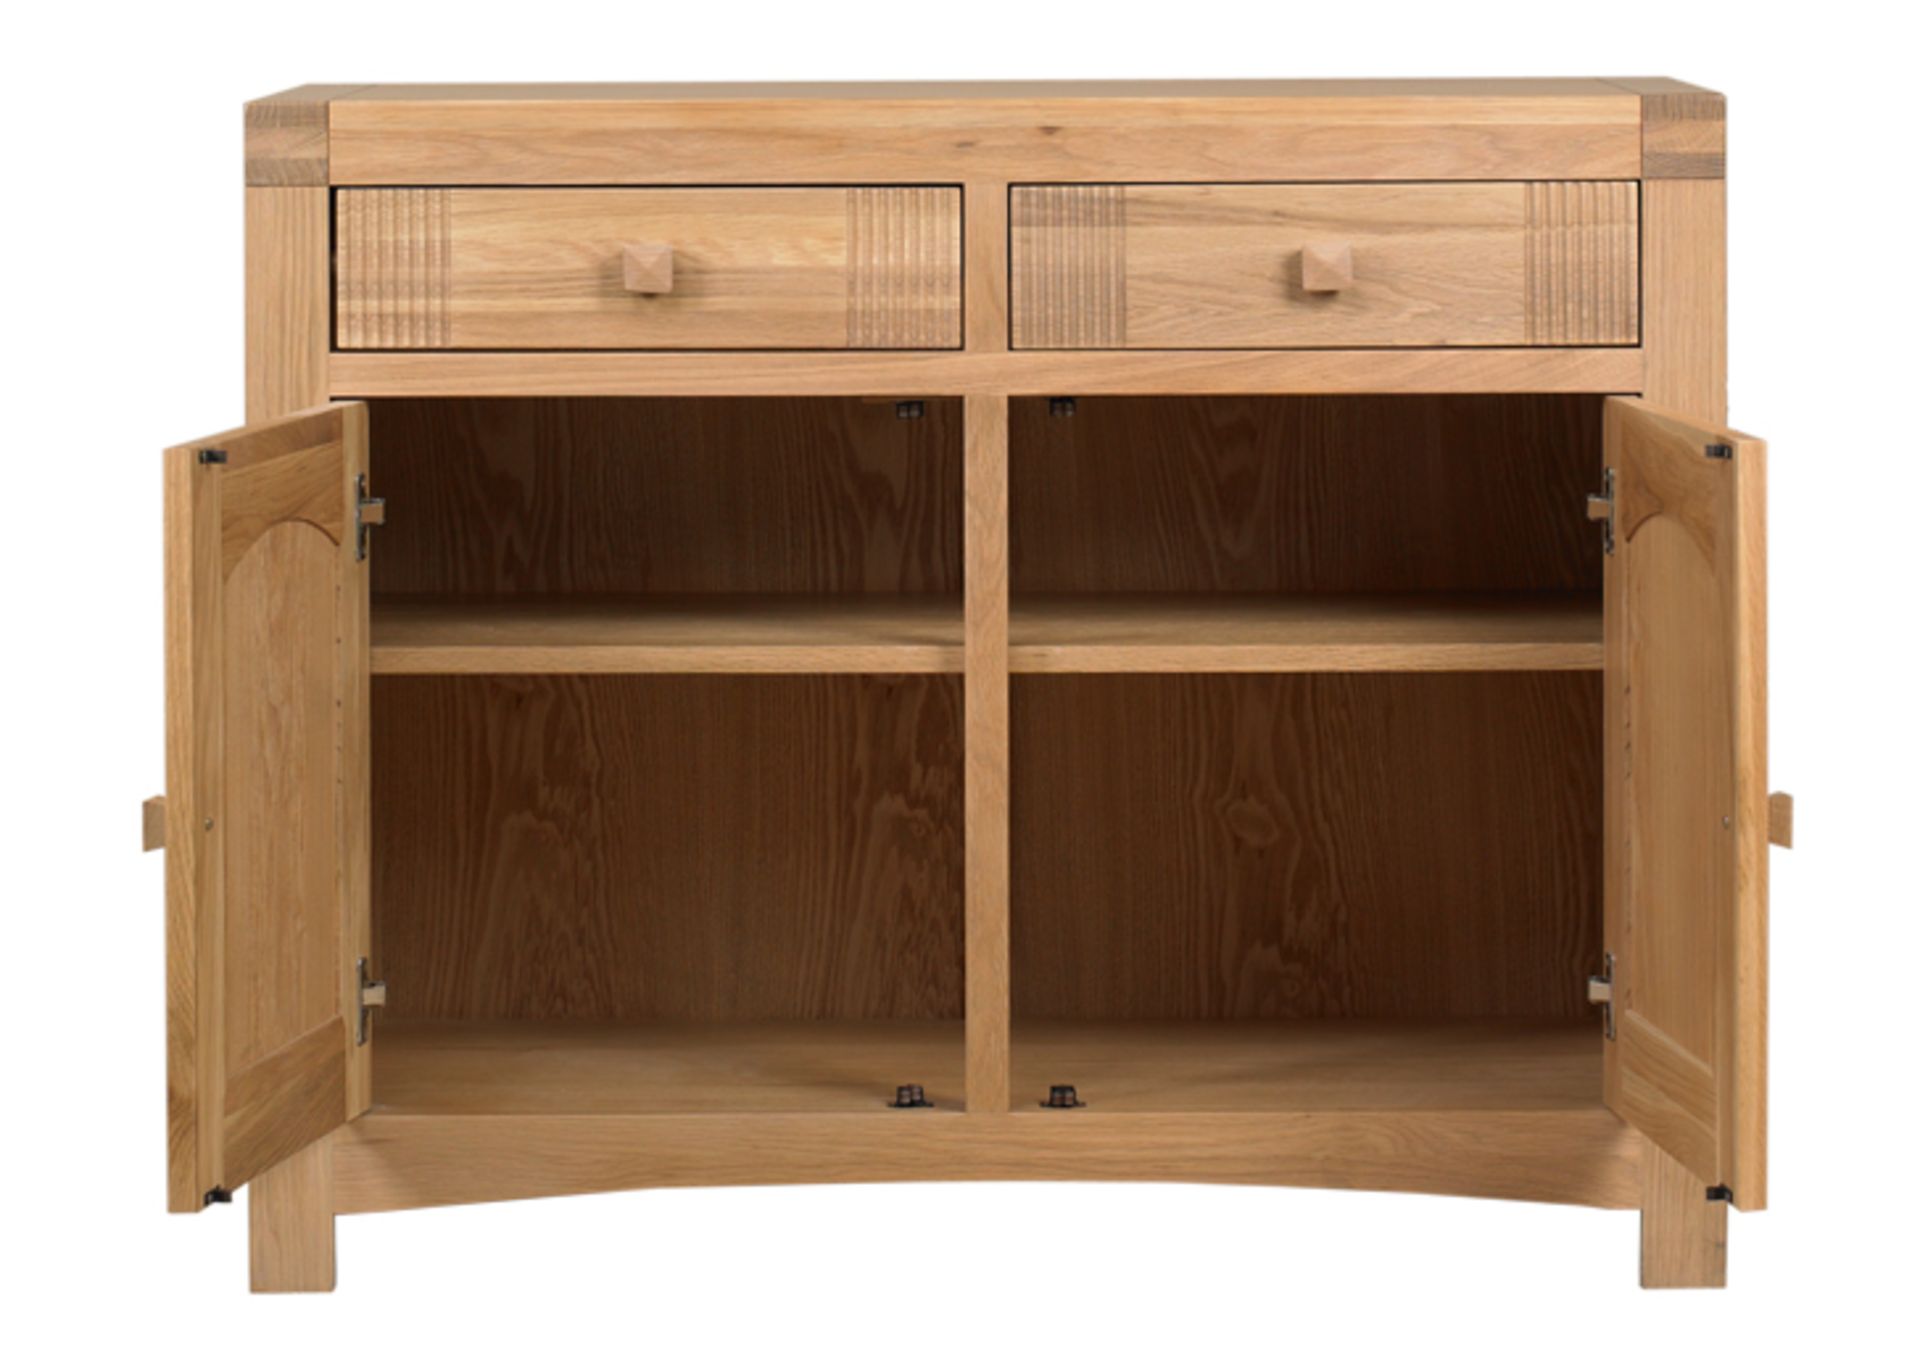 1 x Mark Webster Buckingham Small Sideboad  - Two Door/Two Drawer - White Wash Oak With a Timeless - Image 4 of 5